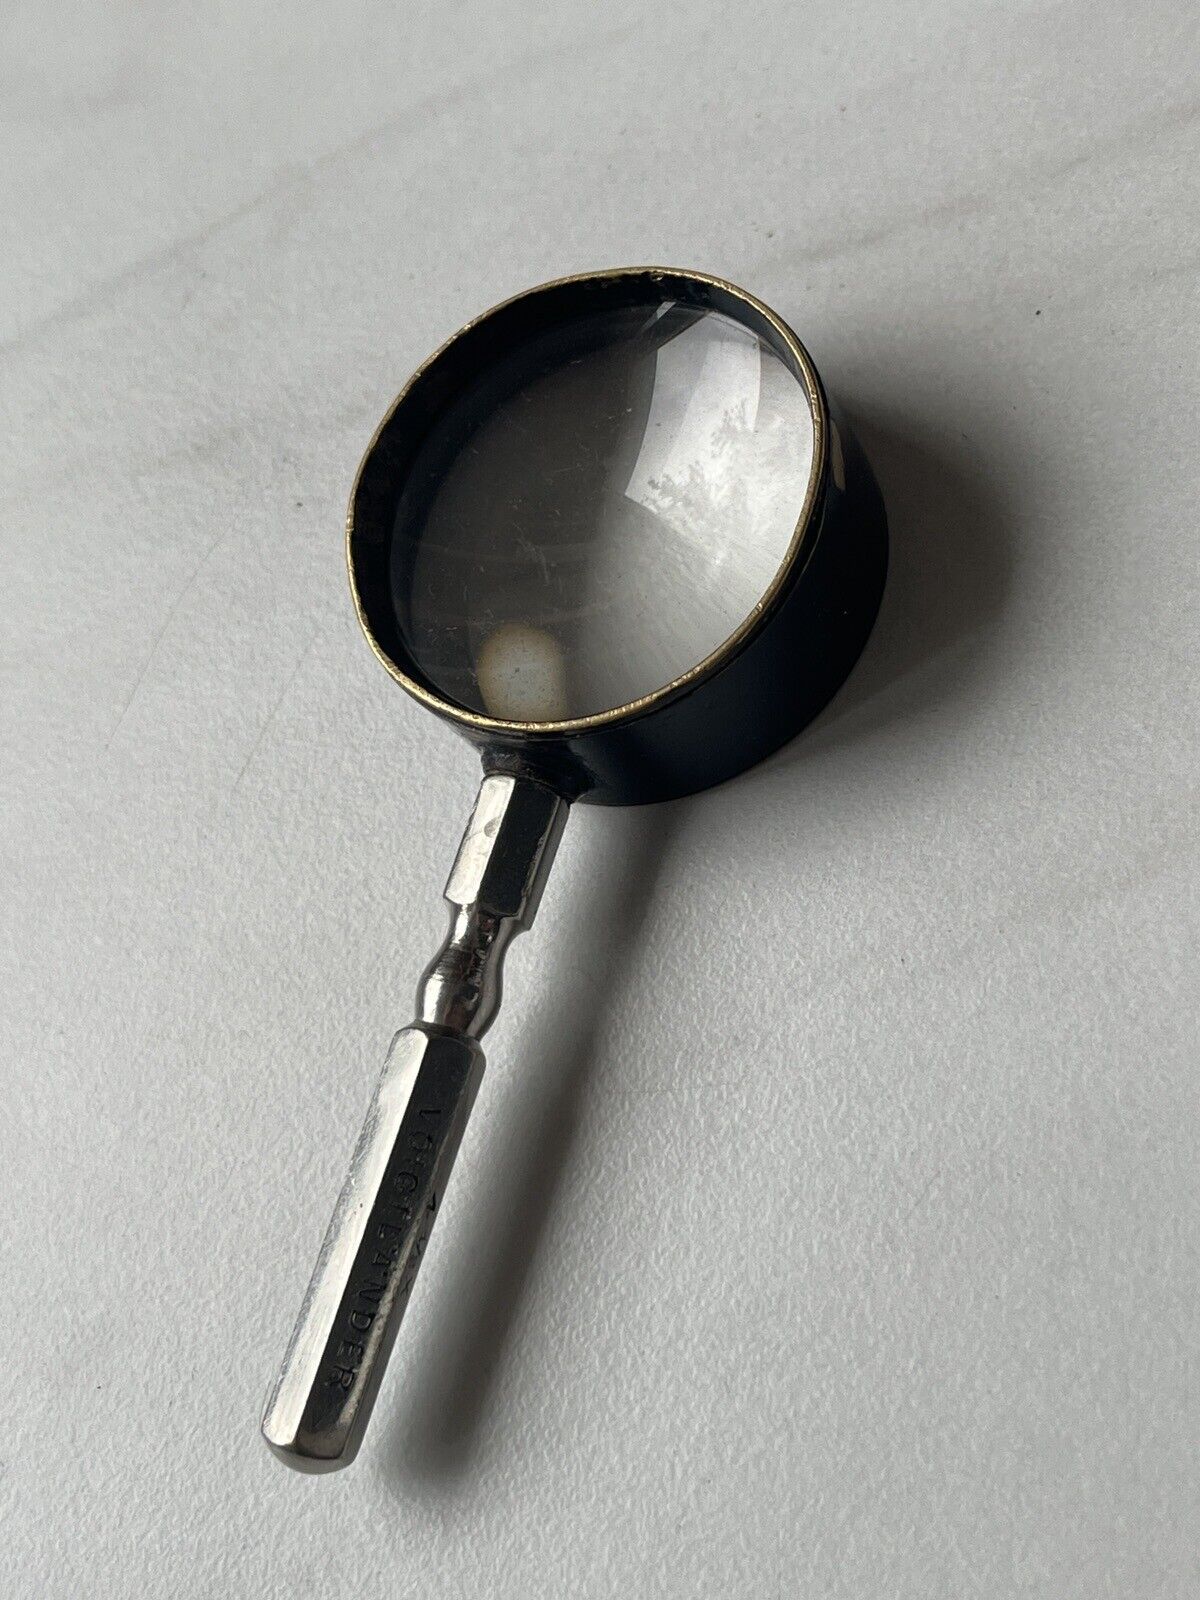 Extremely Rare Magnifying Glass Voigtlander 4.5 X